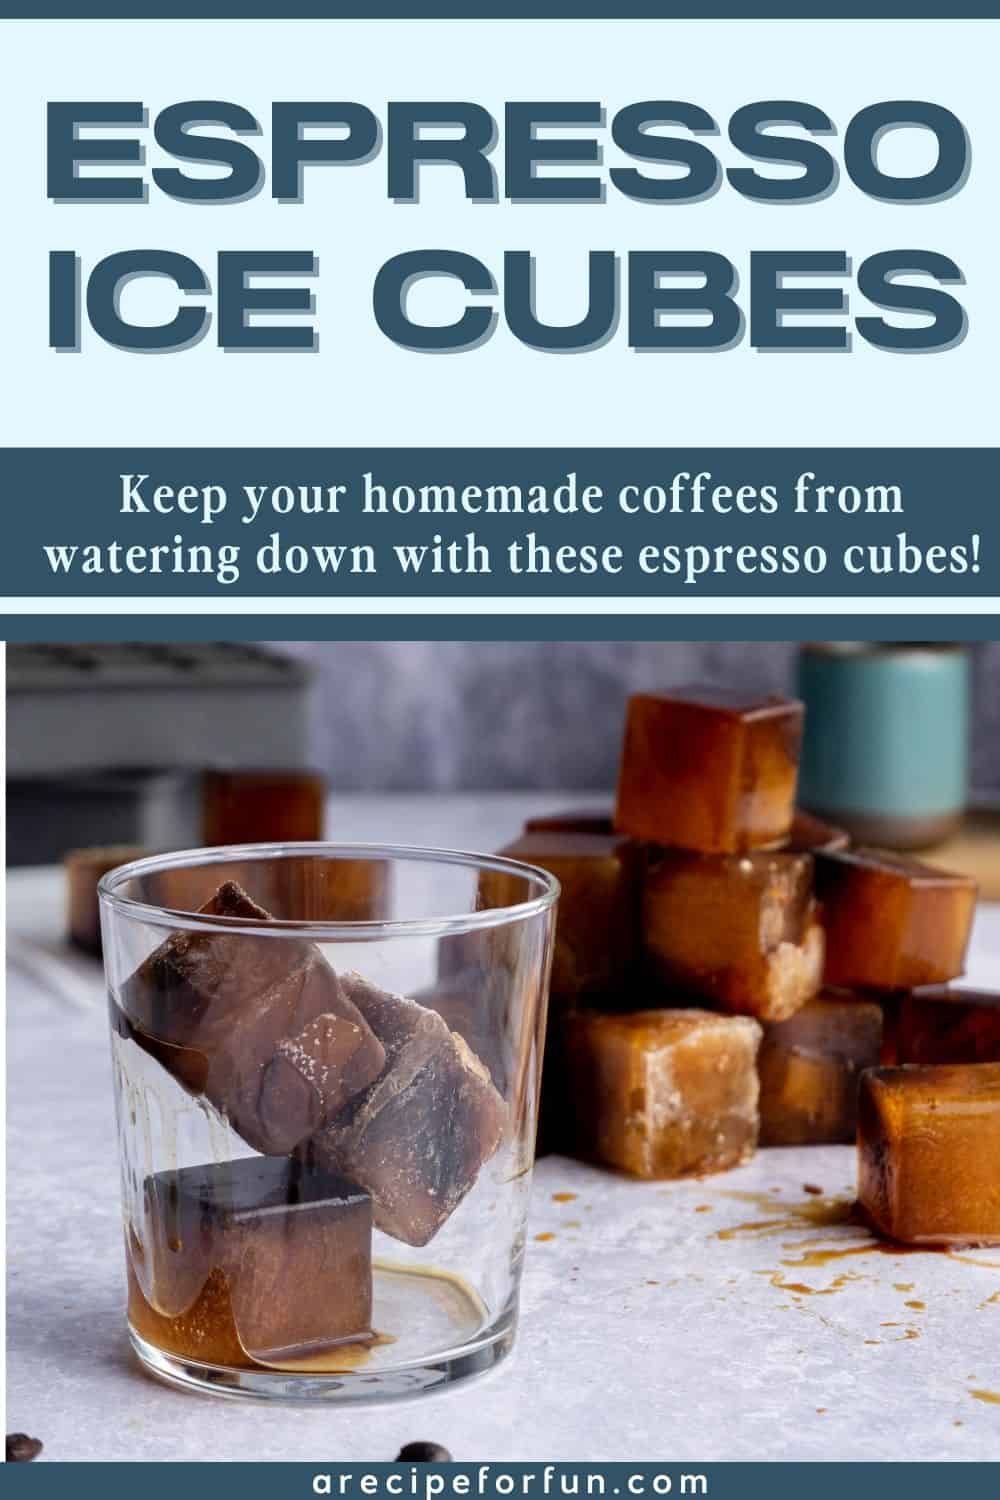 Pinterest Pin for espresso ice cubes.